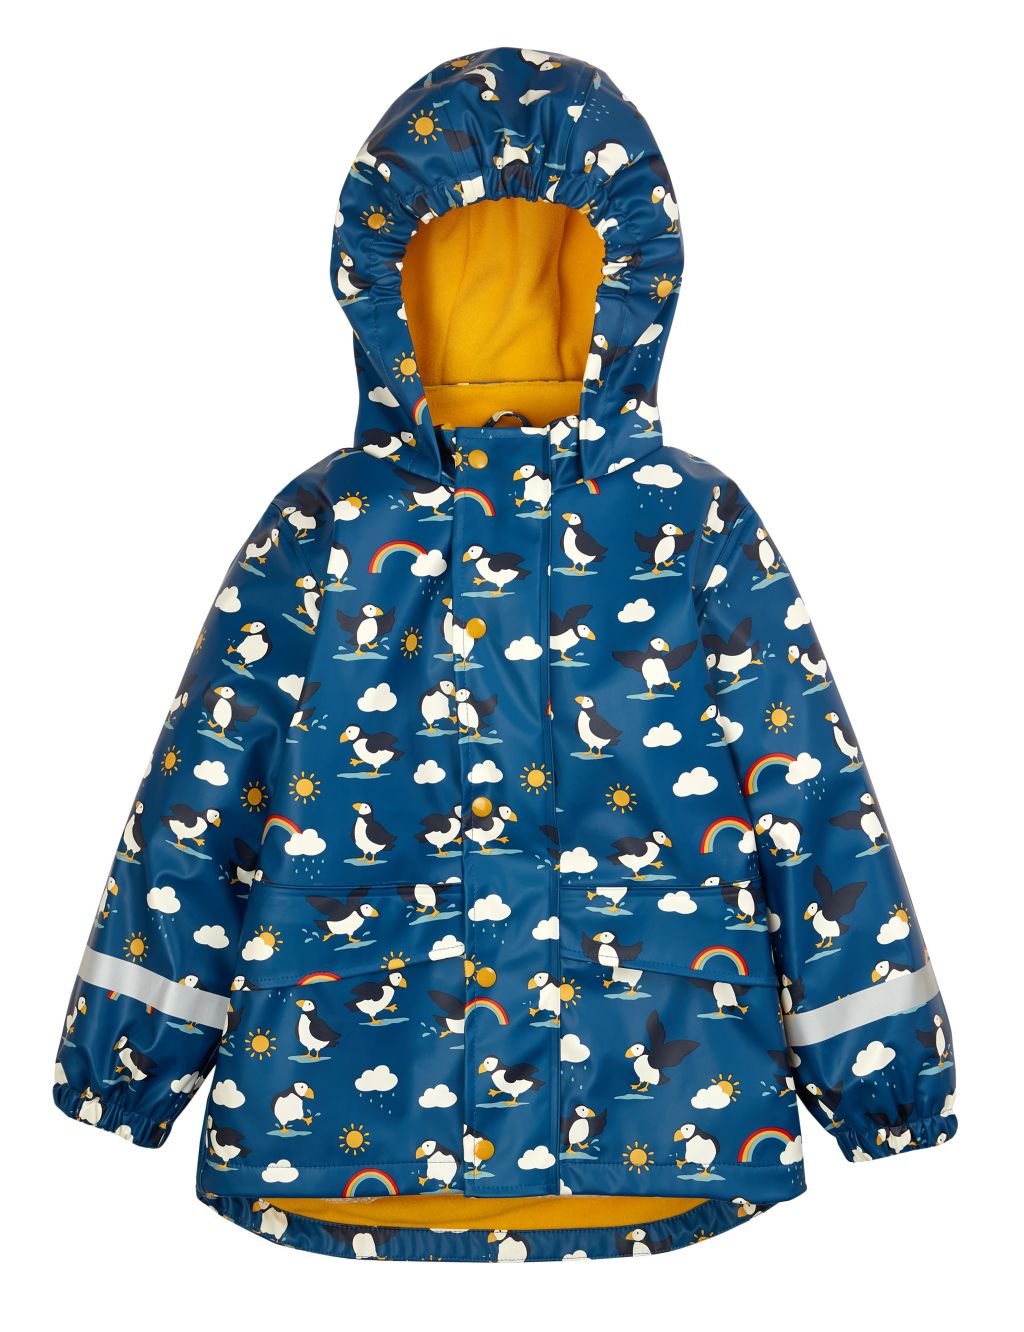 Puffin Print Hooded Fleece Lined Raincoat ( 1 - 10 Yrs) image 1